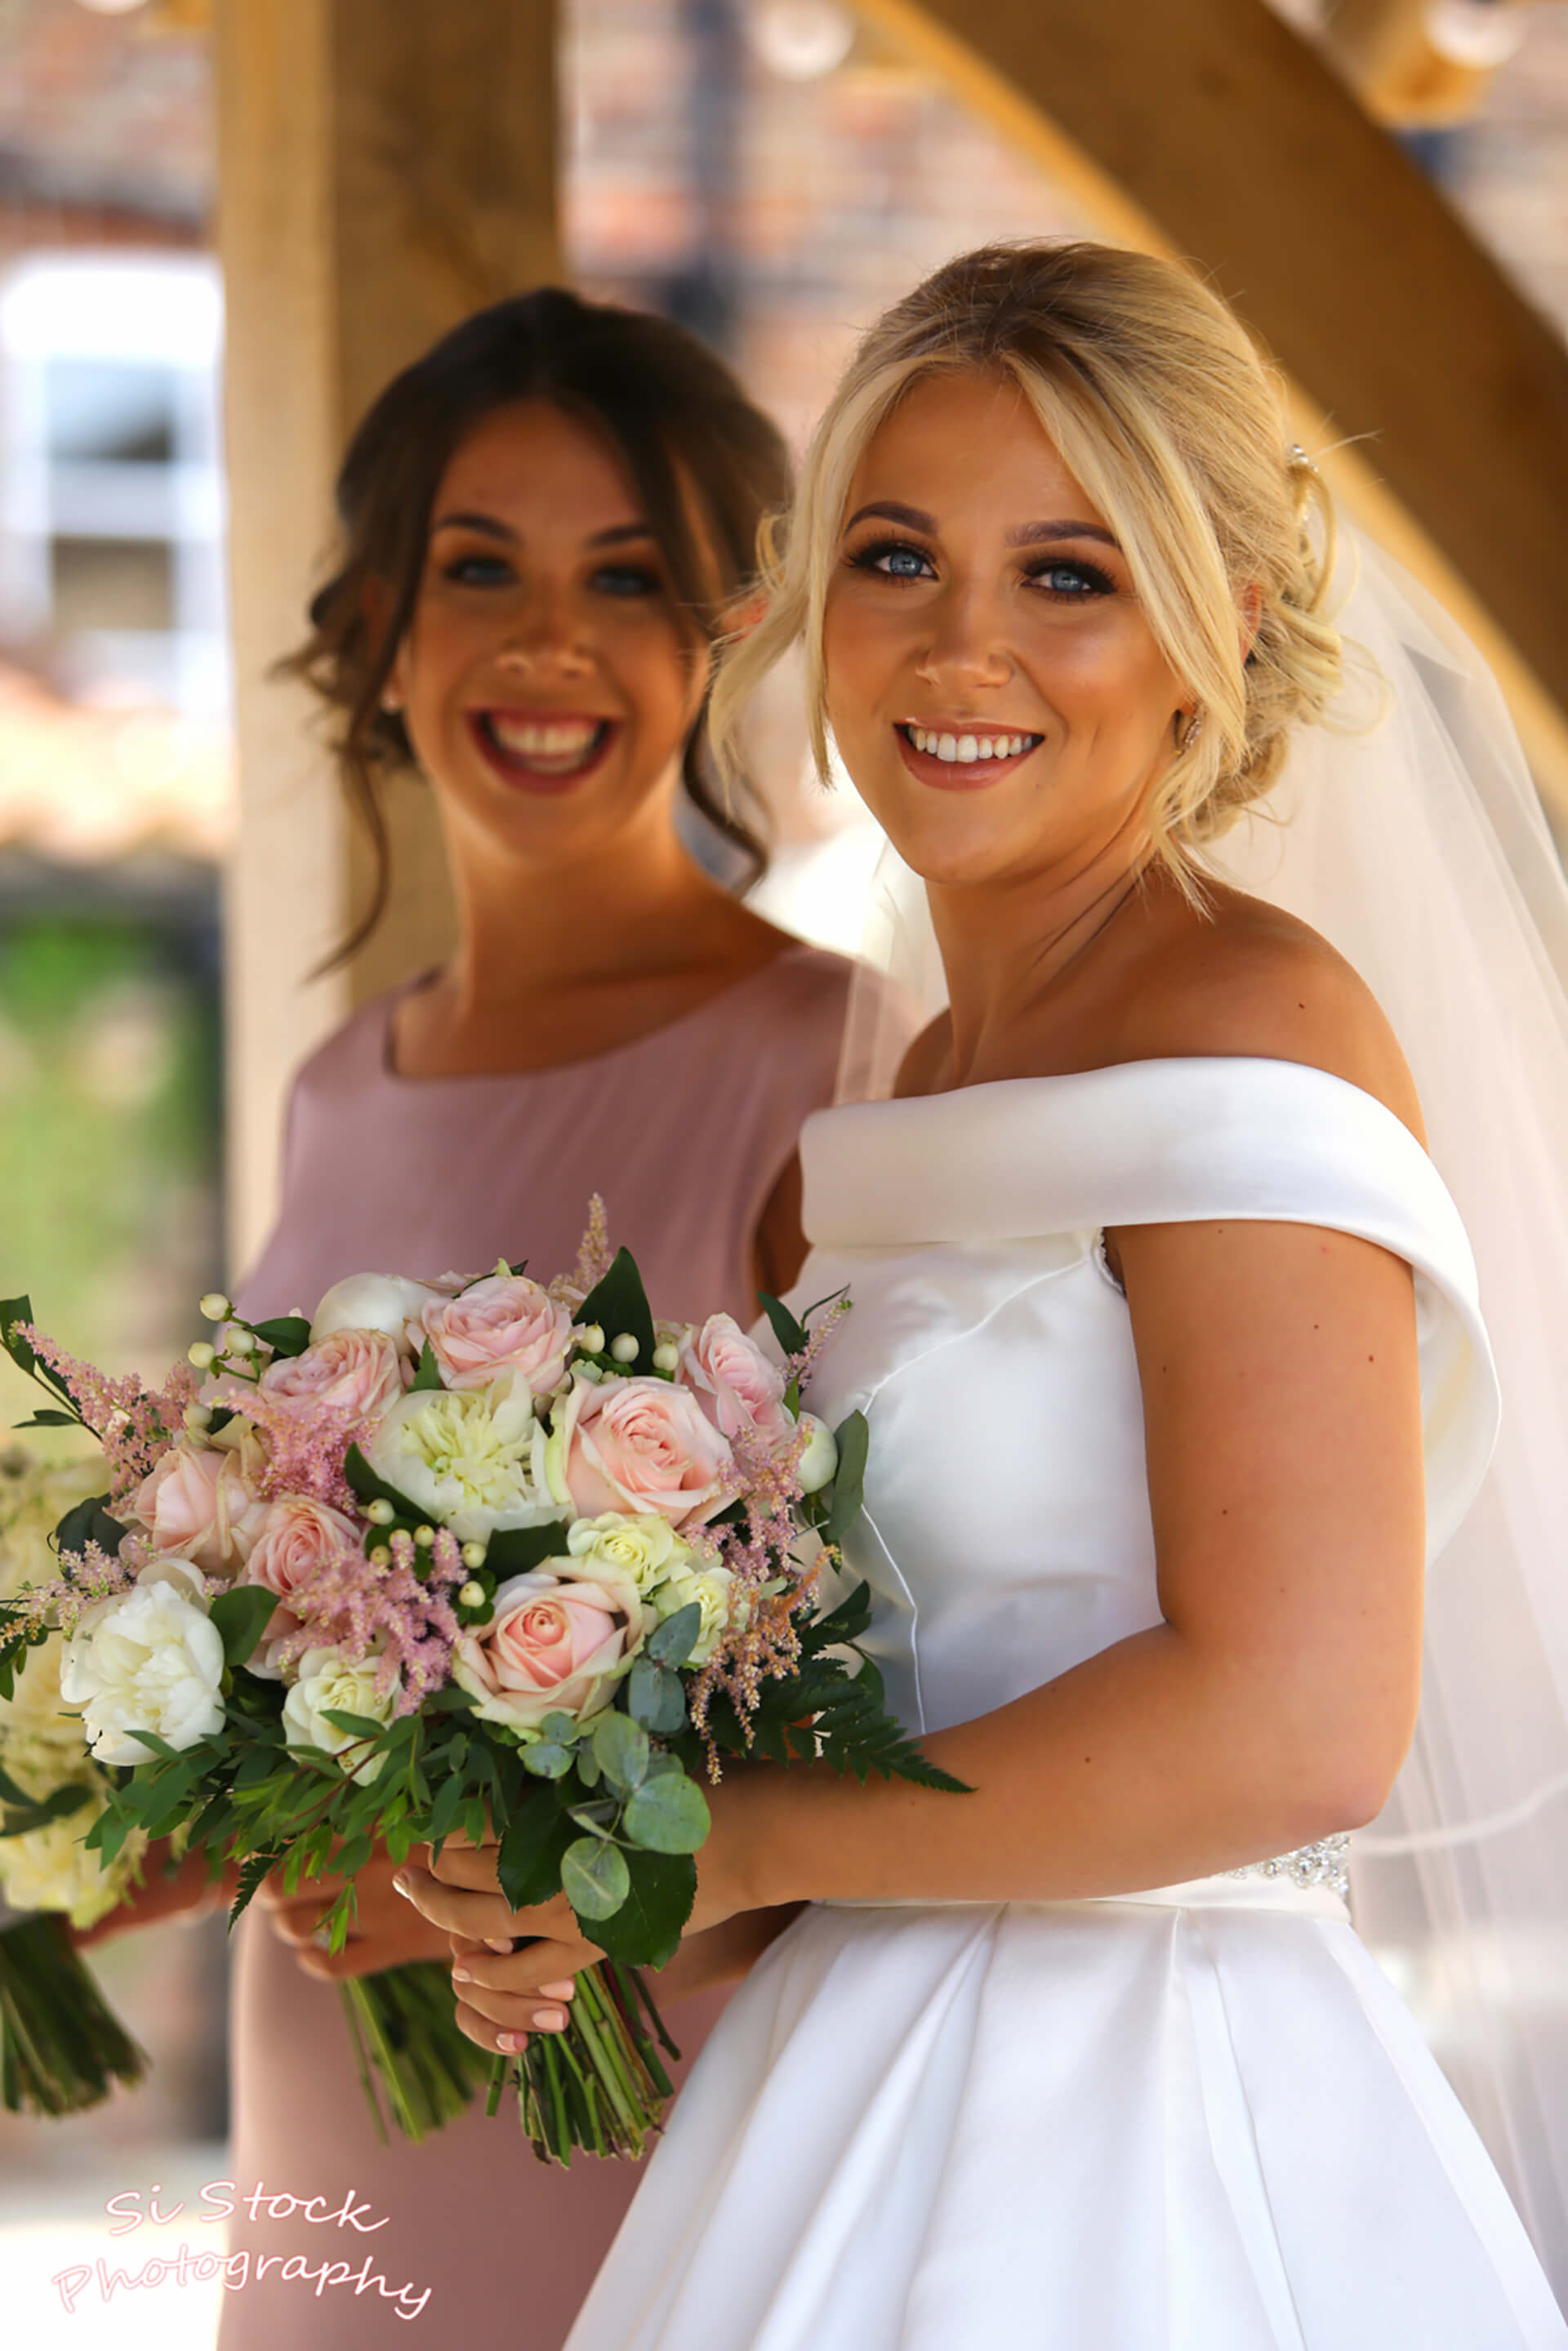 Our beautiful bride Rebecca and her bridesmaid captured by our very own Simon stock. 